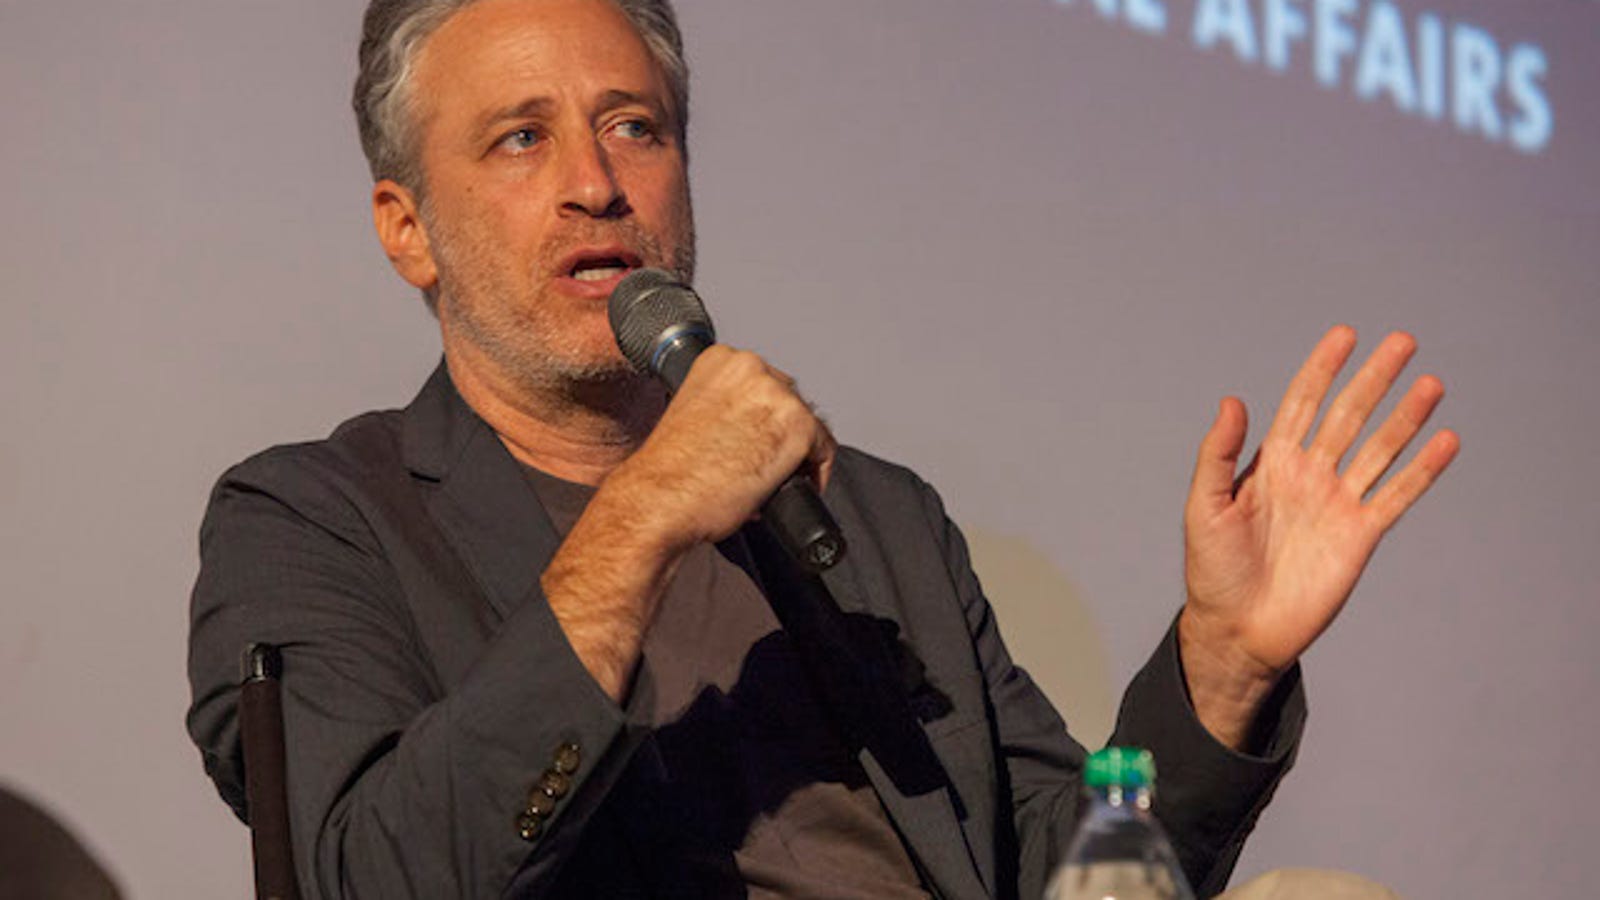 when did jon stewart leave the daily show